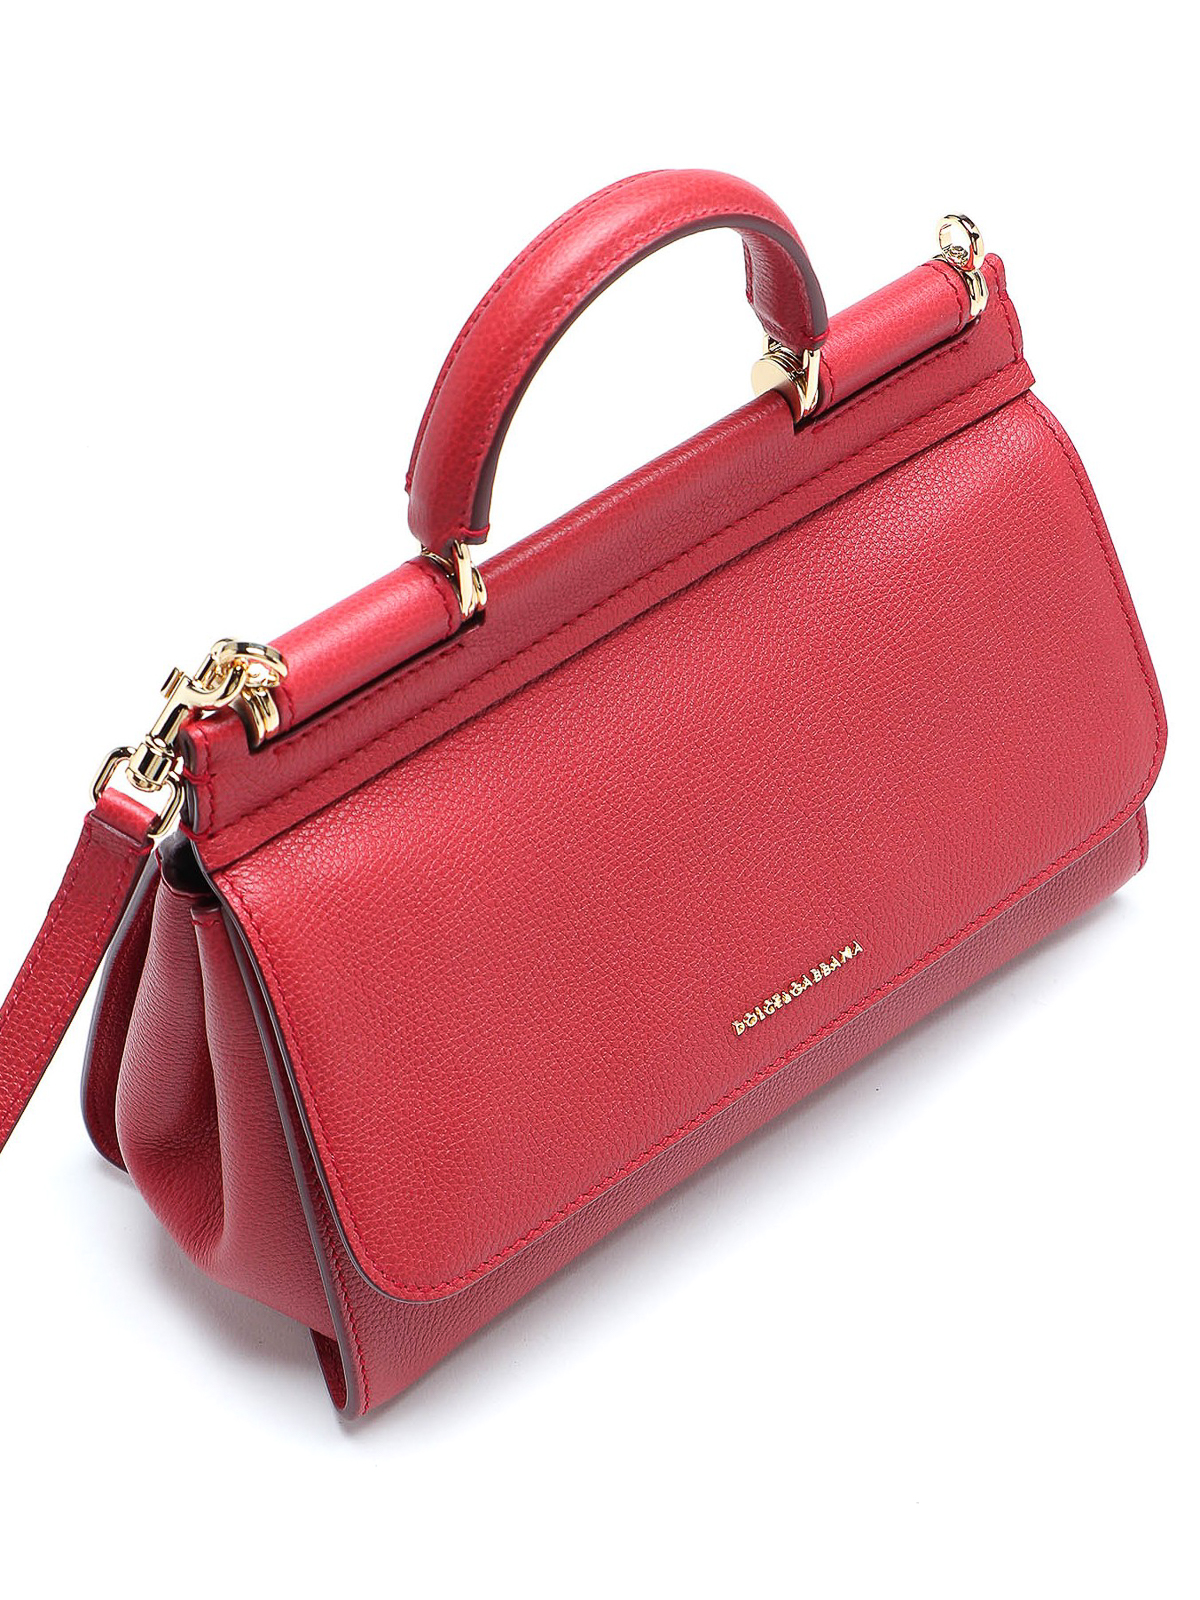 dolce and gabbana mini sicily bag red